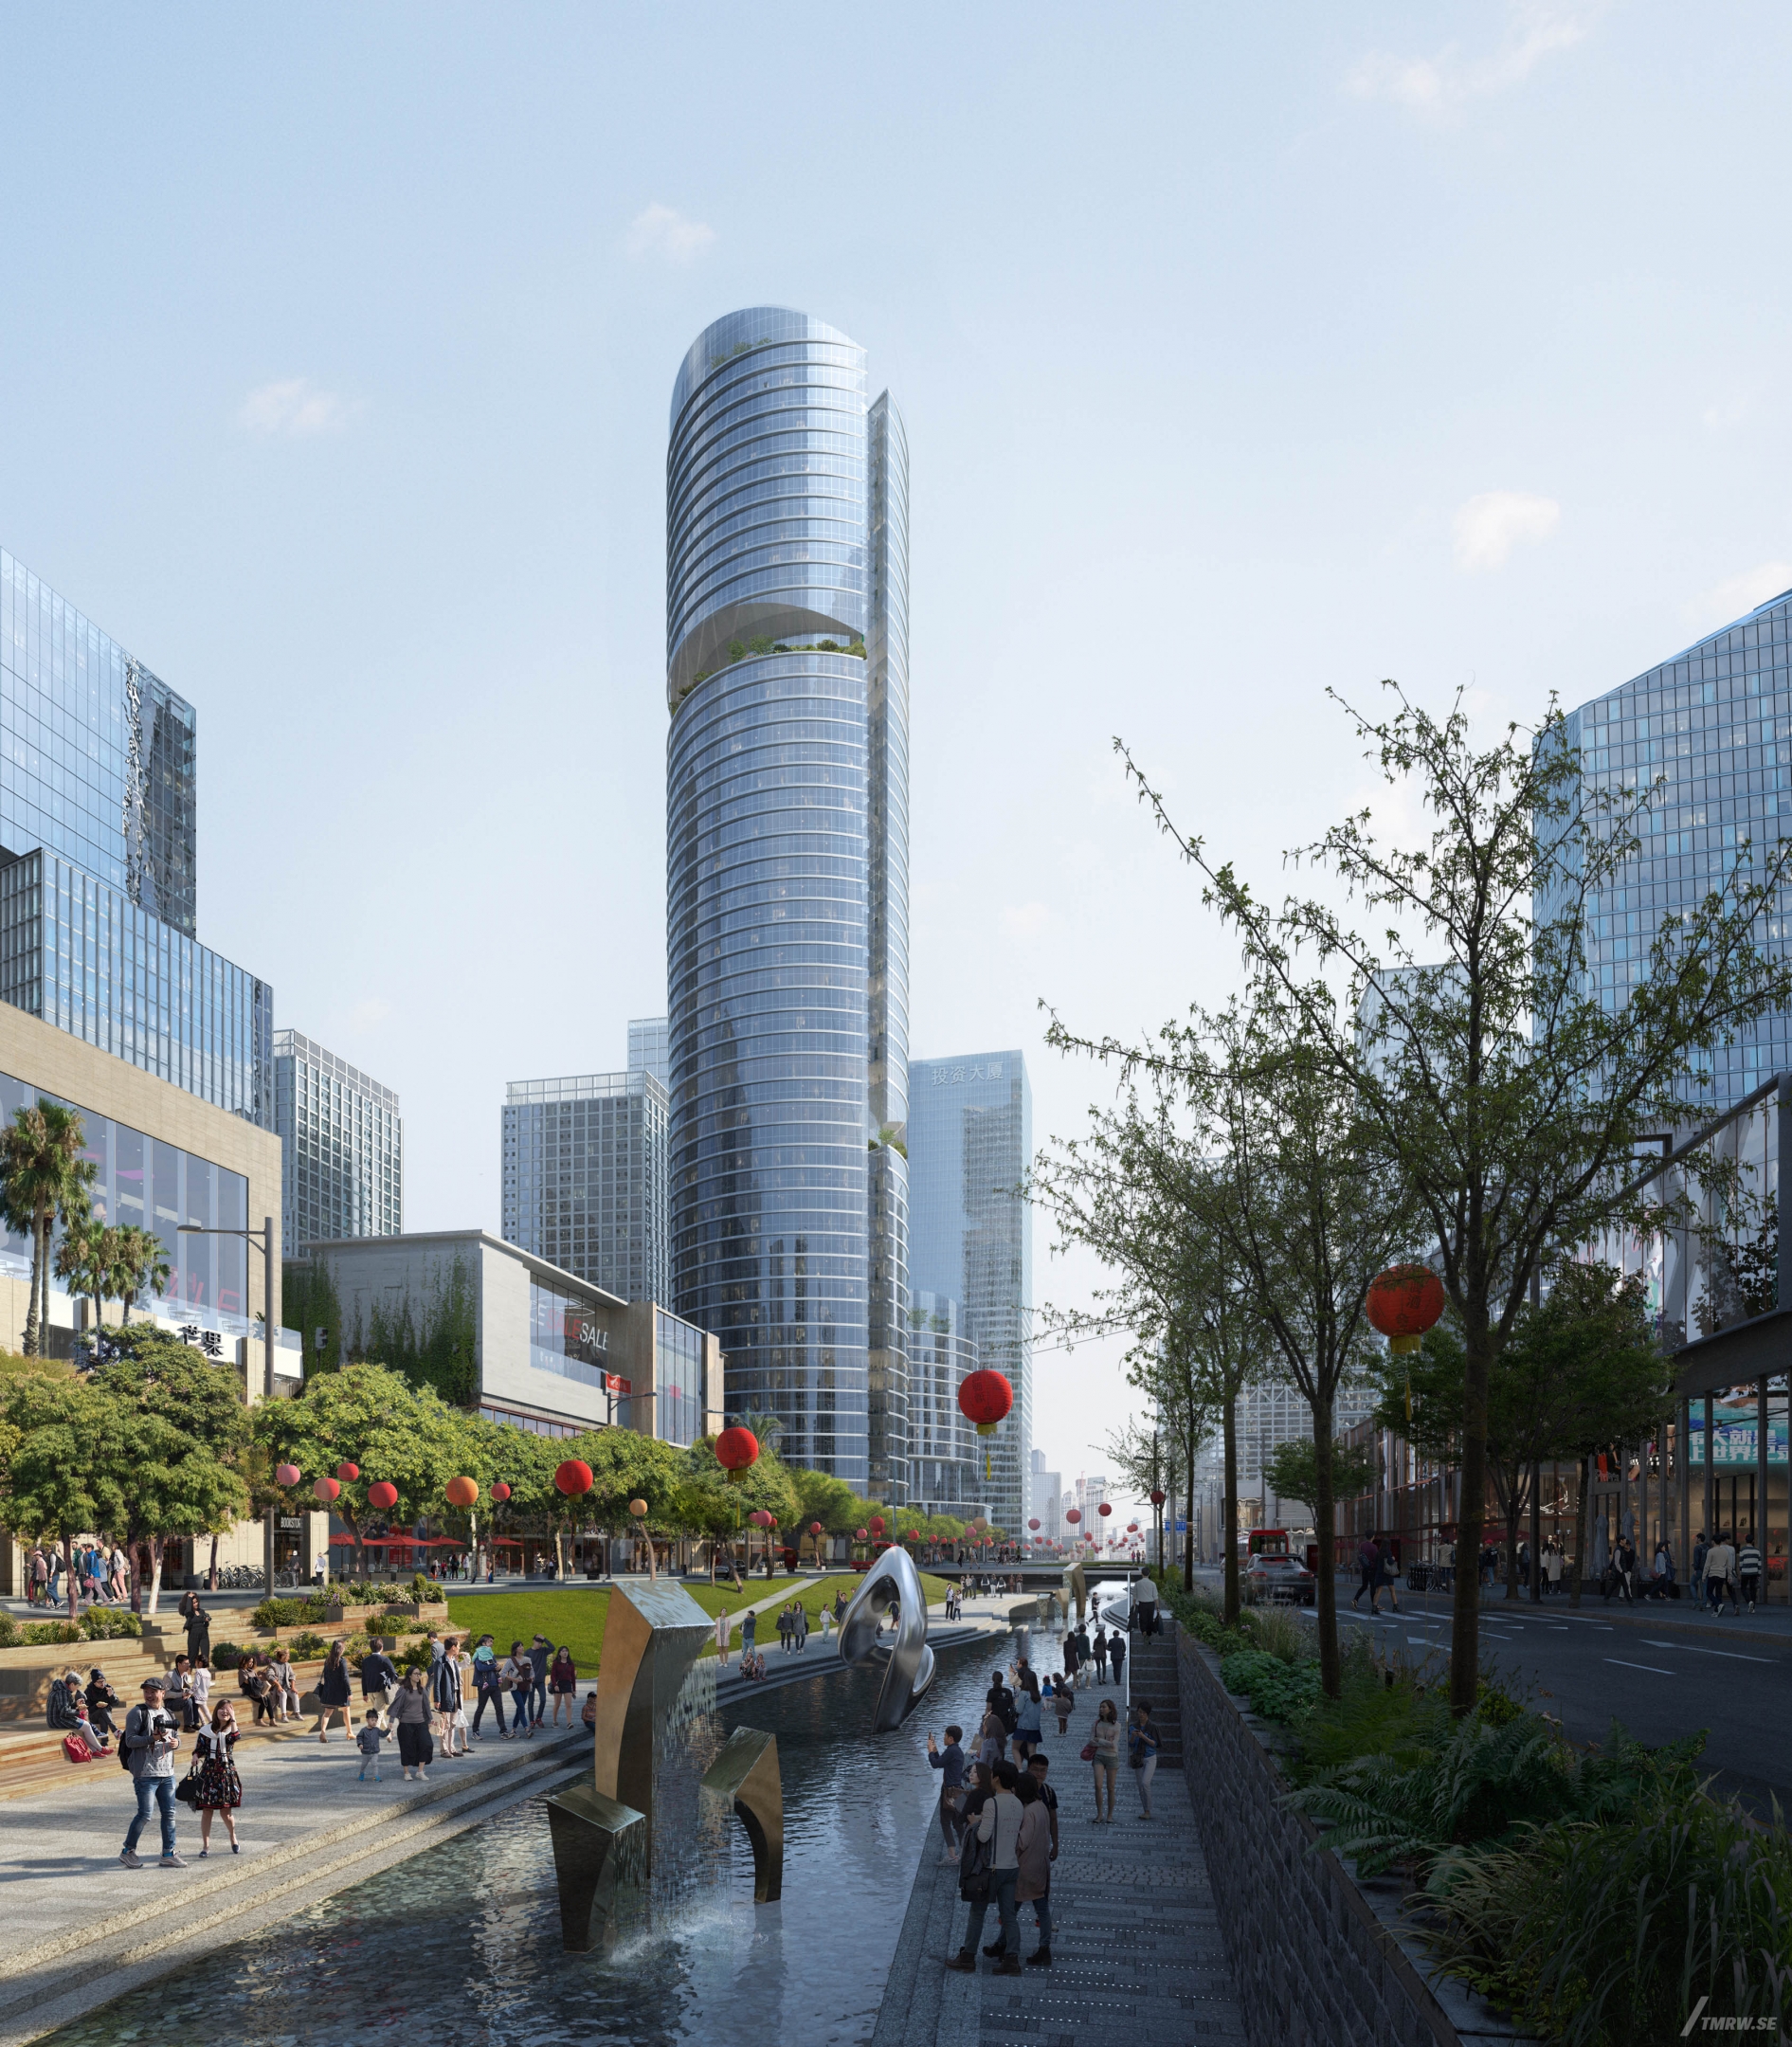 Architectural visualization of Shenzen for KPF, exterior of glass skyscrapers, people socializing in the streets